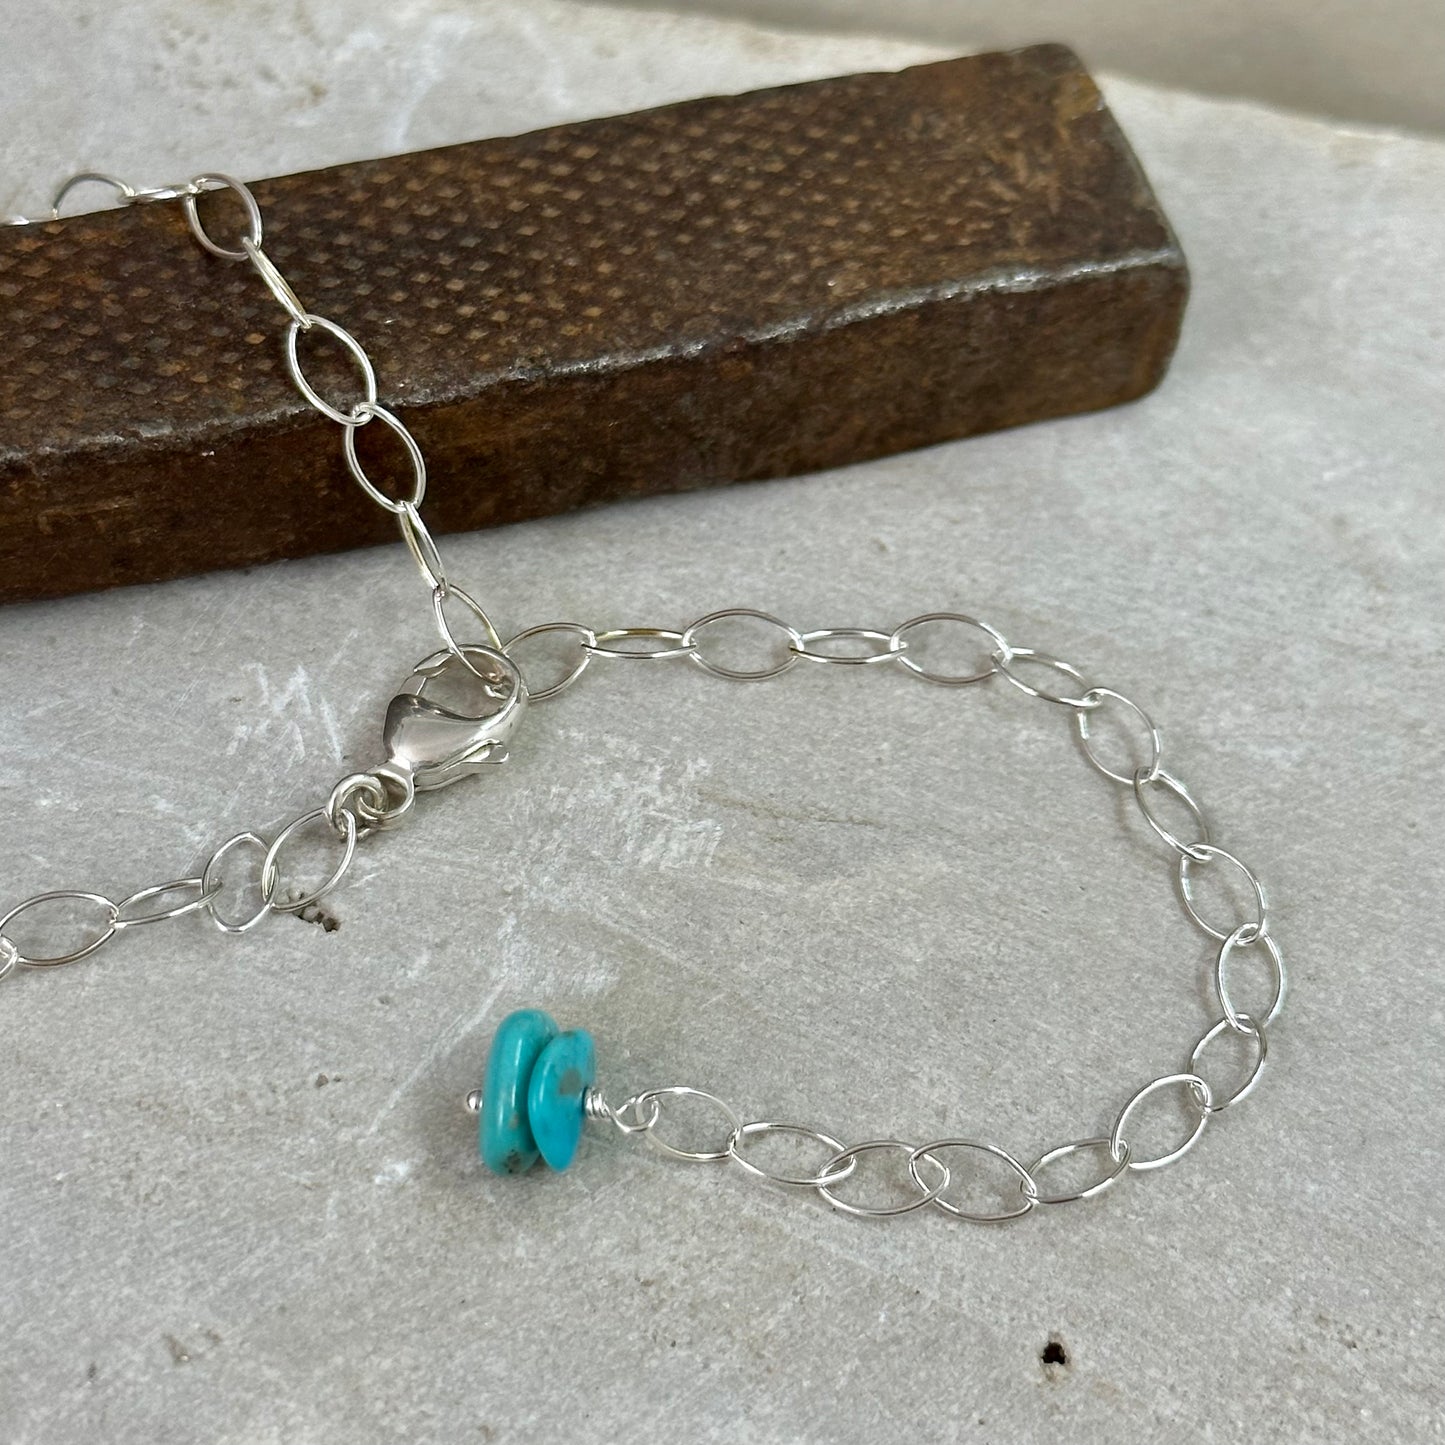 "Skies of Summer" ~ Sleeping Beauty Turquoise Necklace